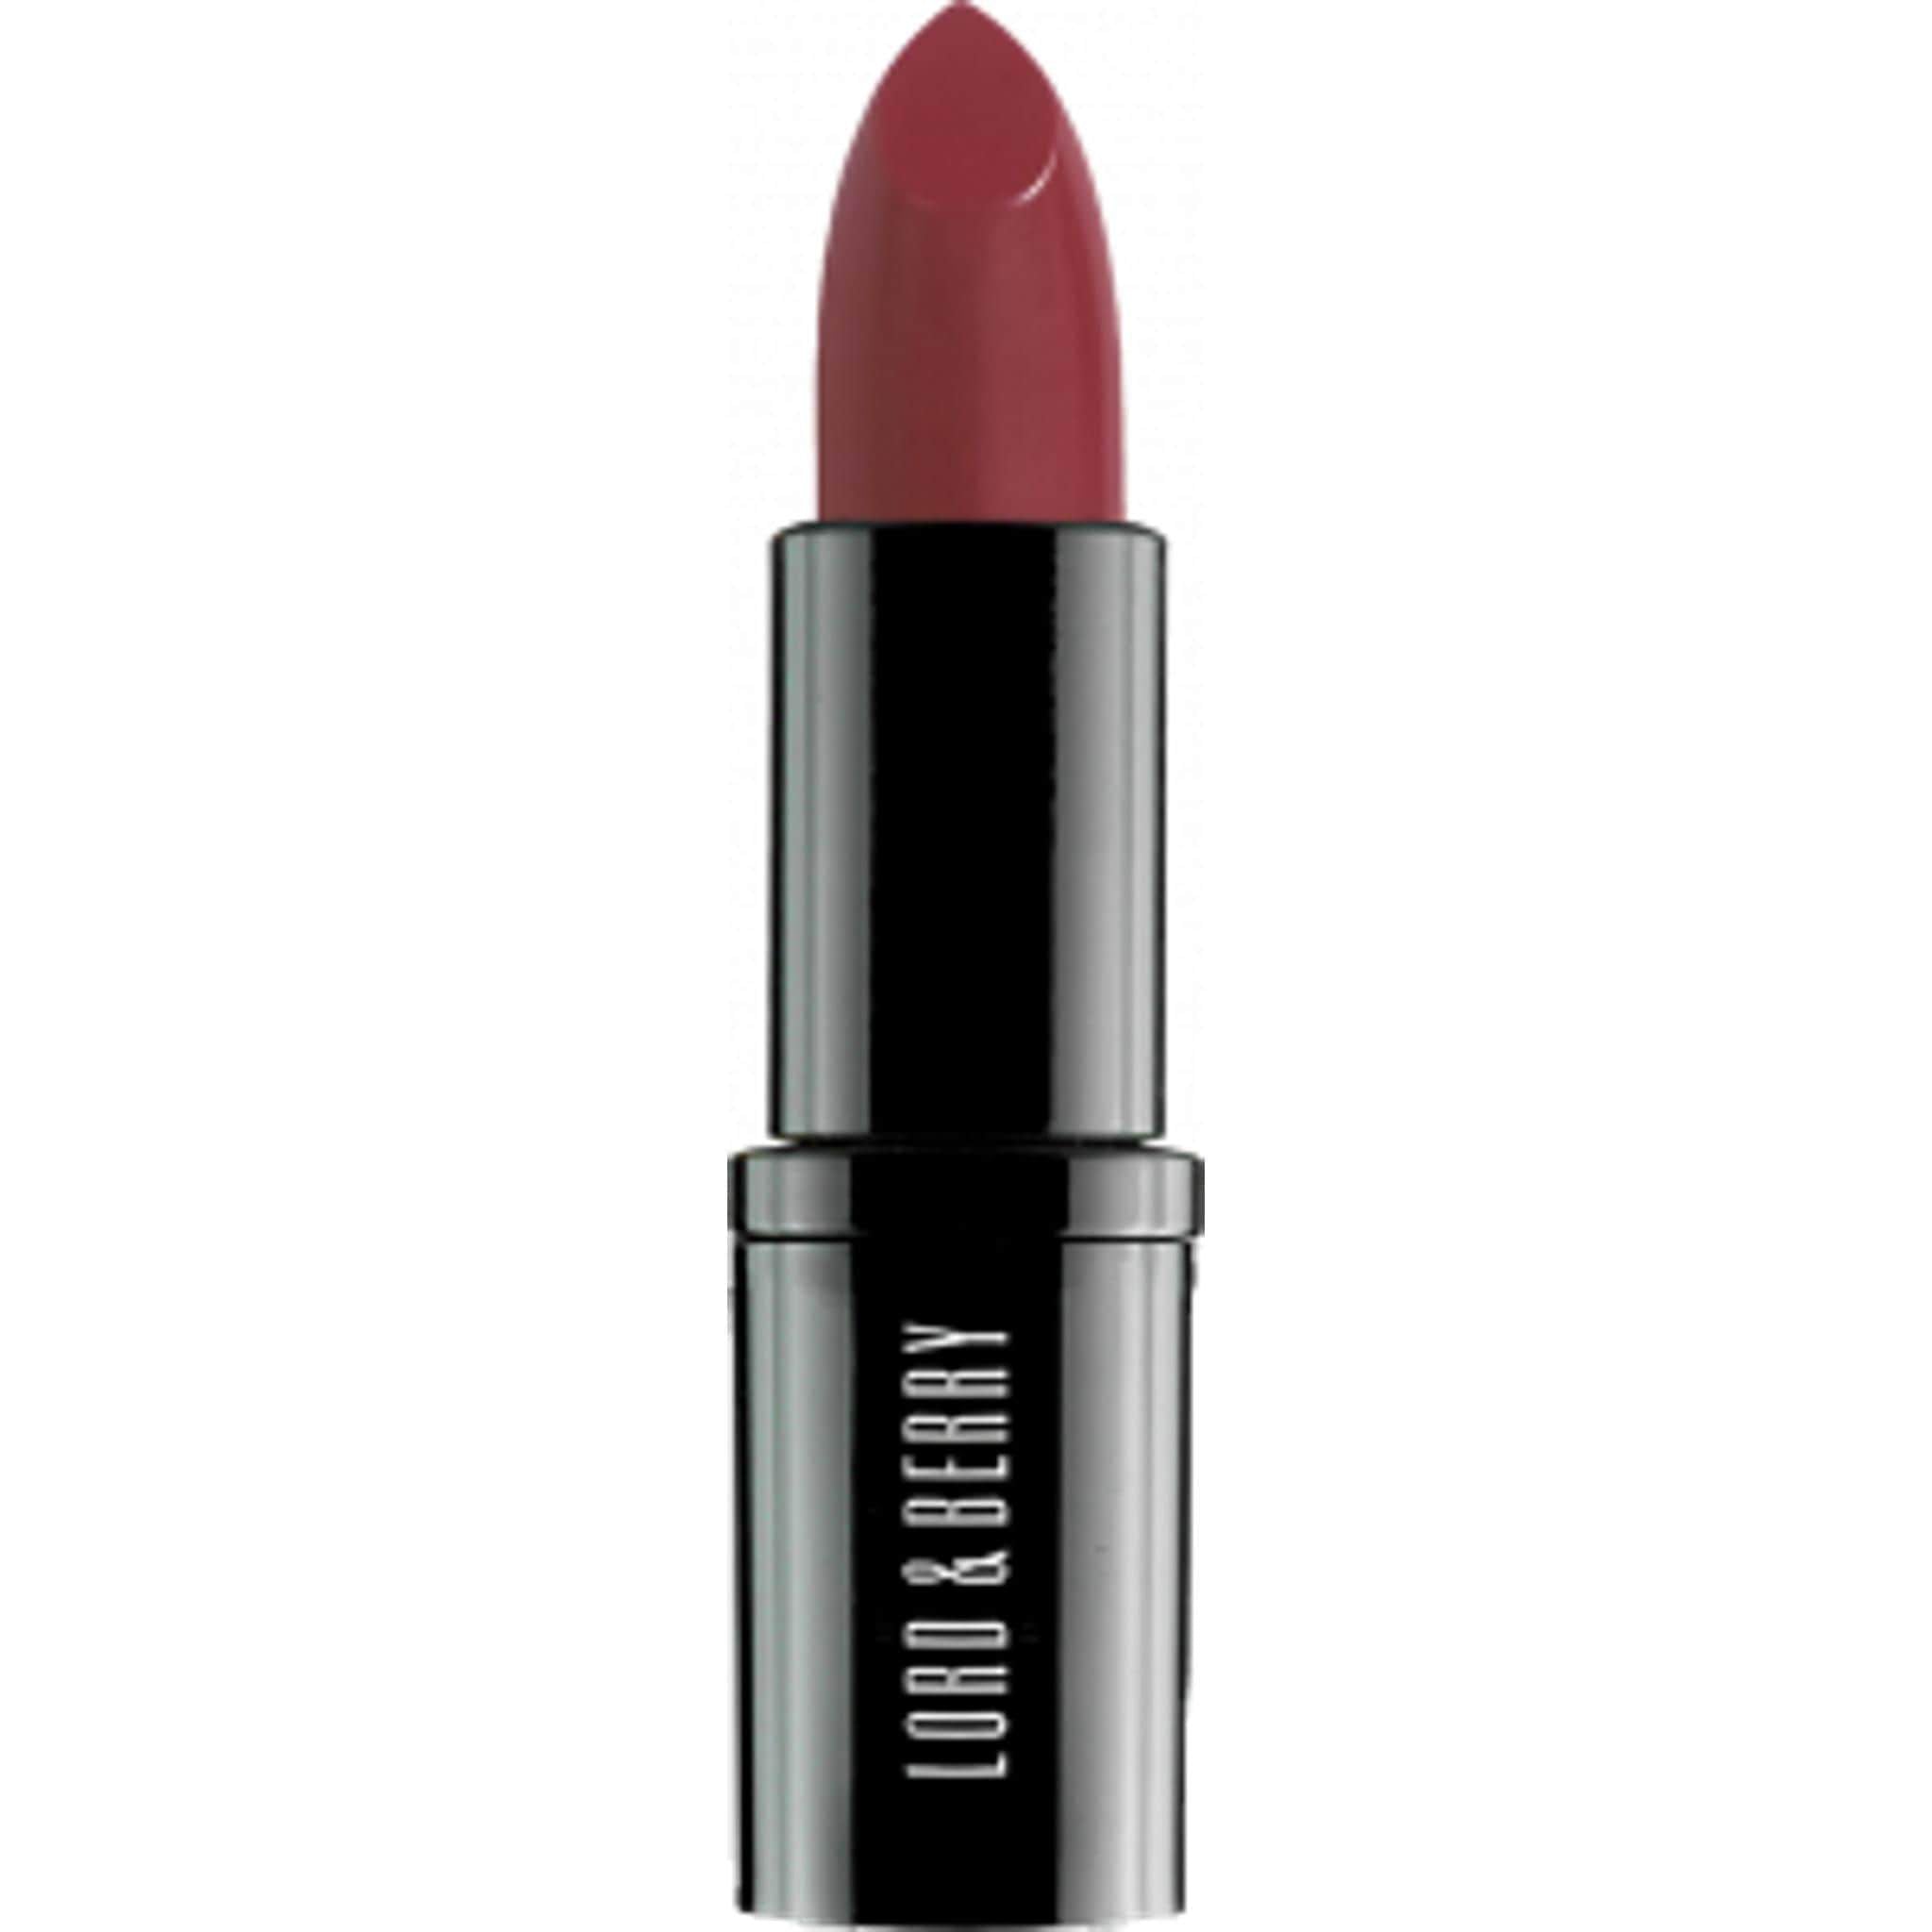 LORD & BERRY Absolute - Kissable #7435, Lipstick, London Loves Beauty